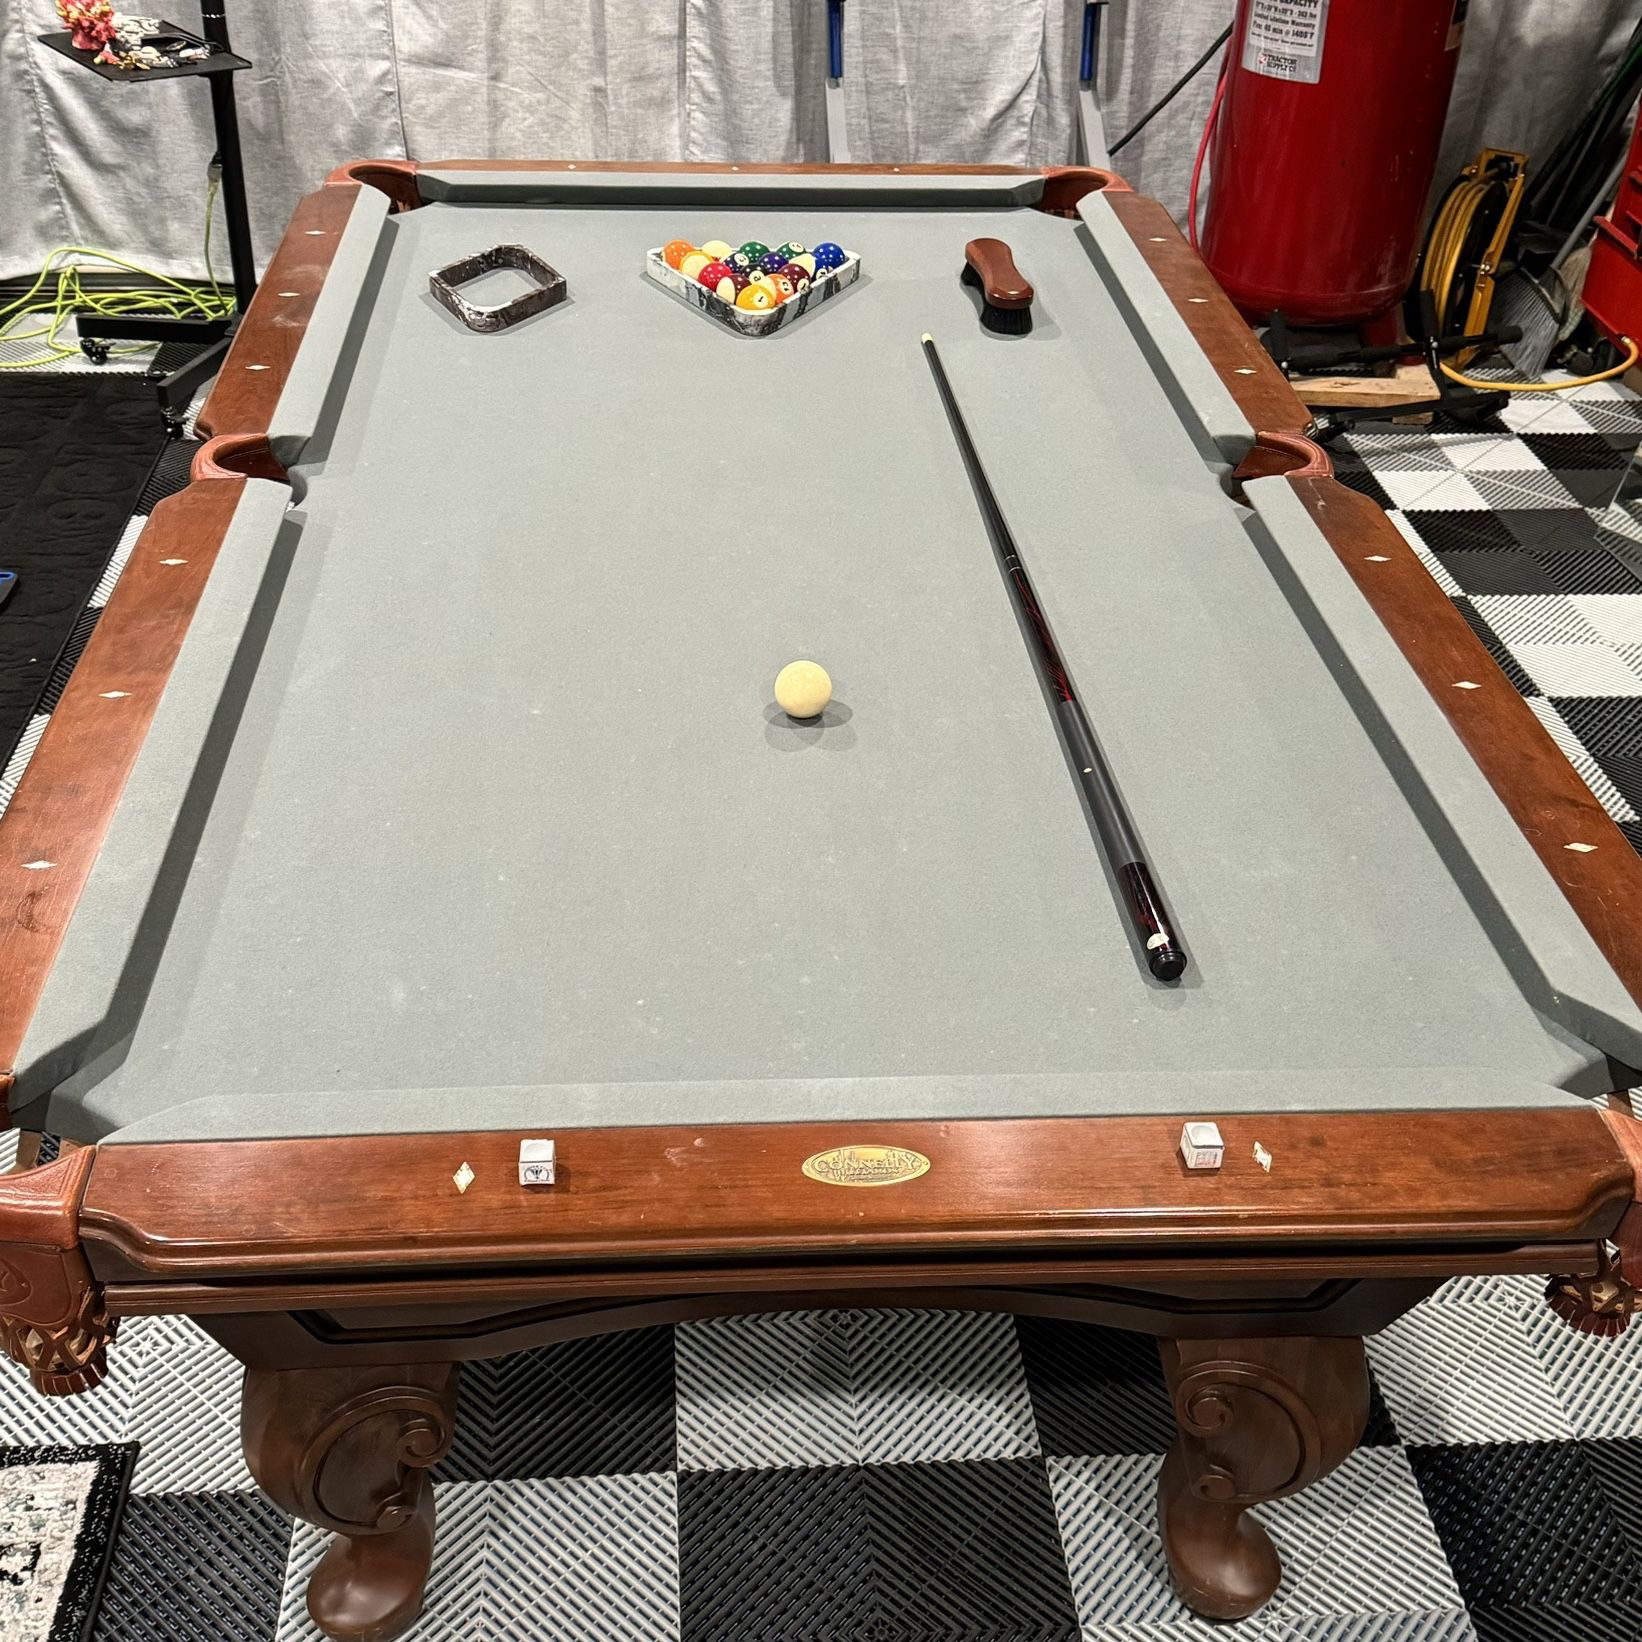 Connelly Billiards Regulation Pool Table